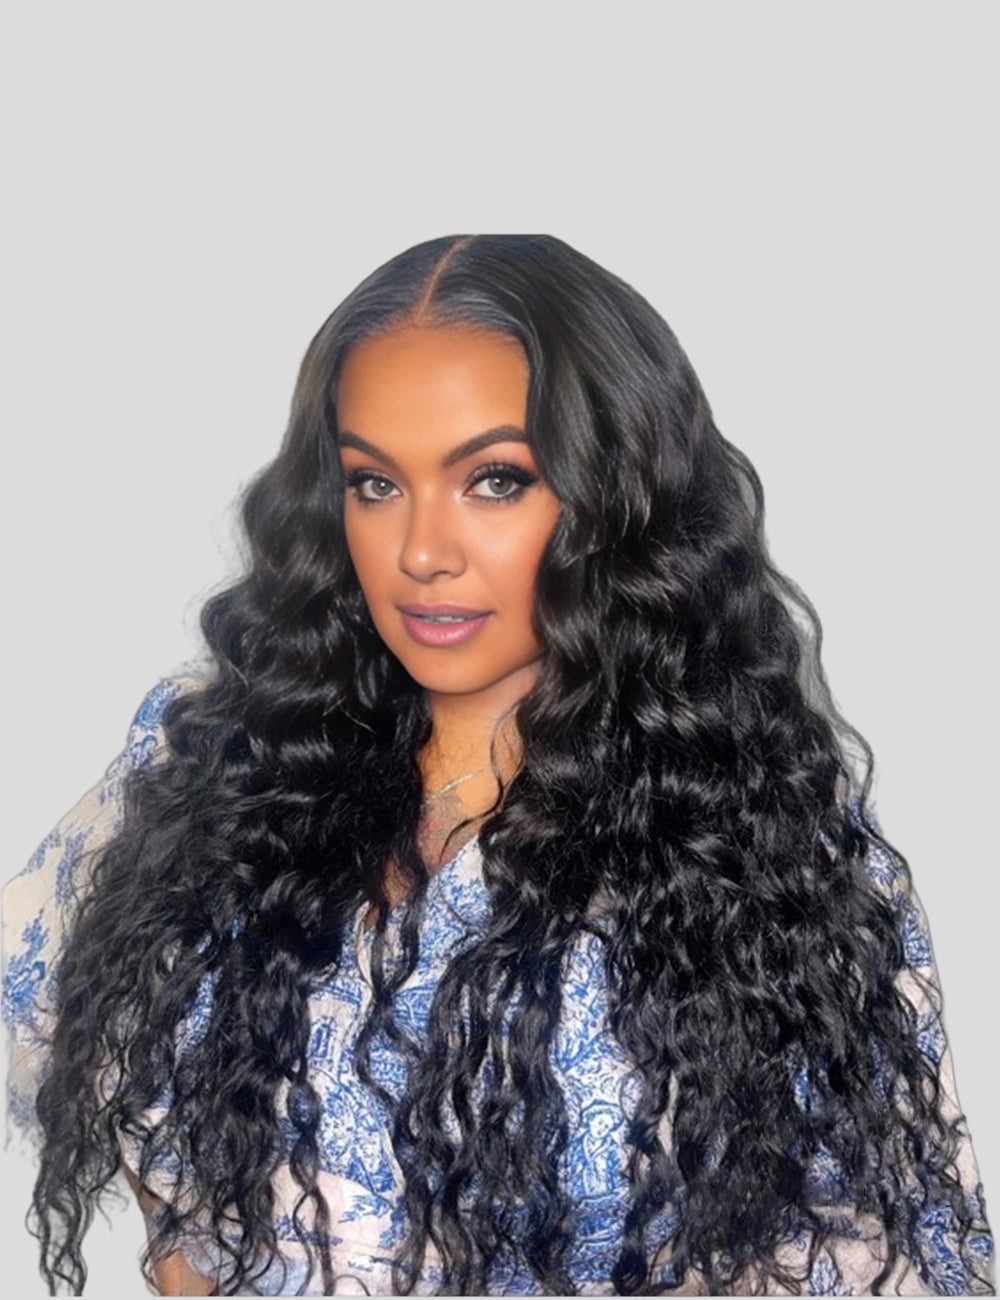 Invisible Knots HD Lace Glueless Human Hair Wigs Loose Deep Wave Wig Wear And Go Pre Cut Wigs